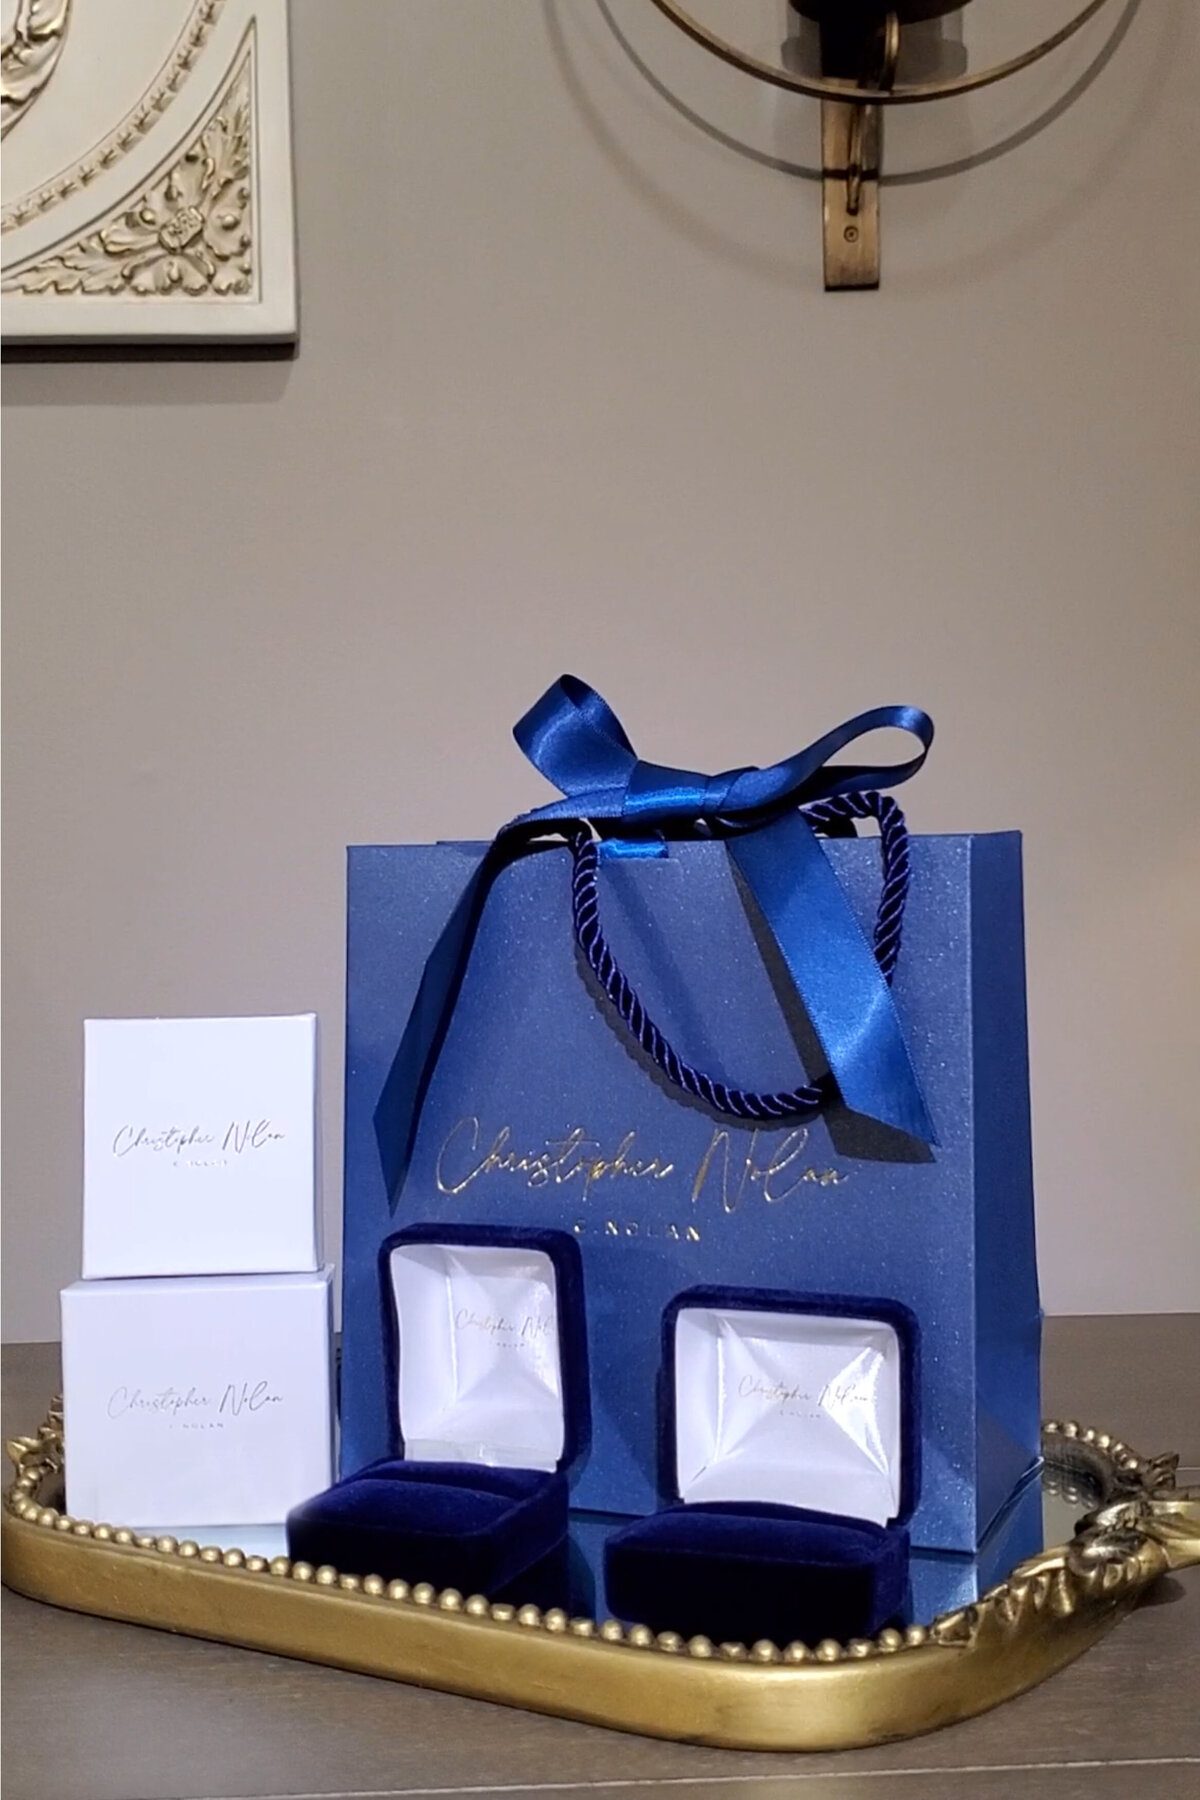 Blue velvet ring boxes lined with silk